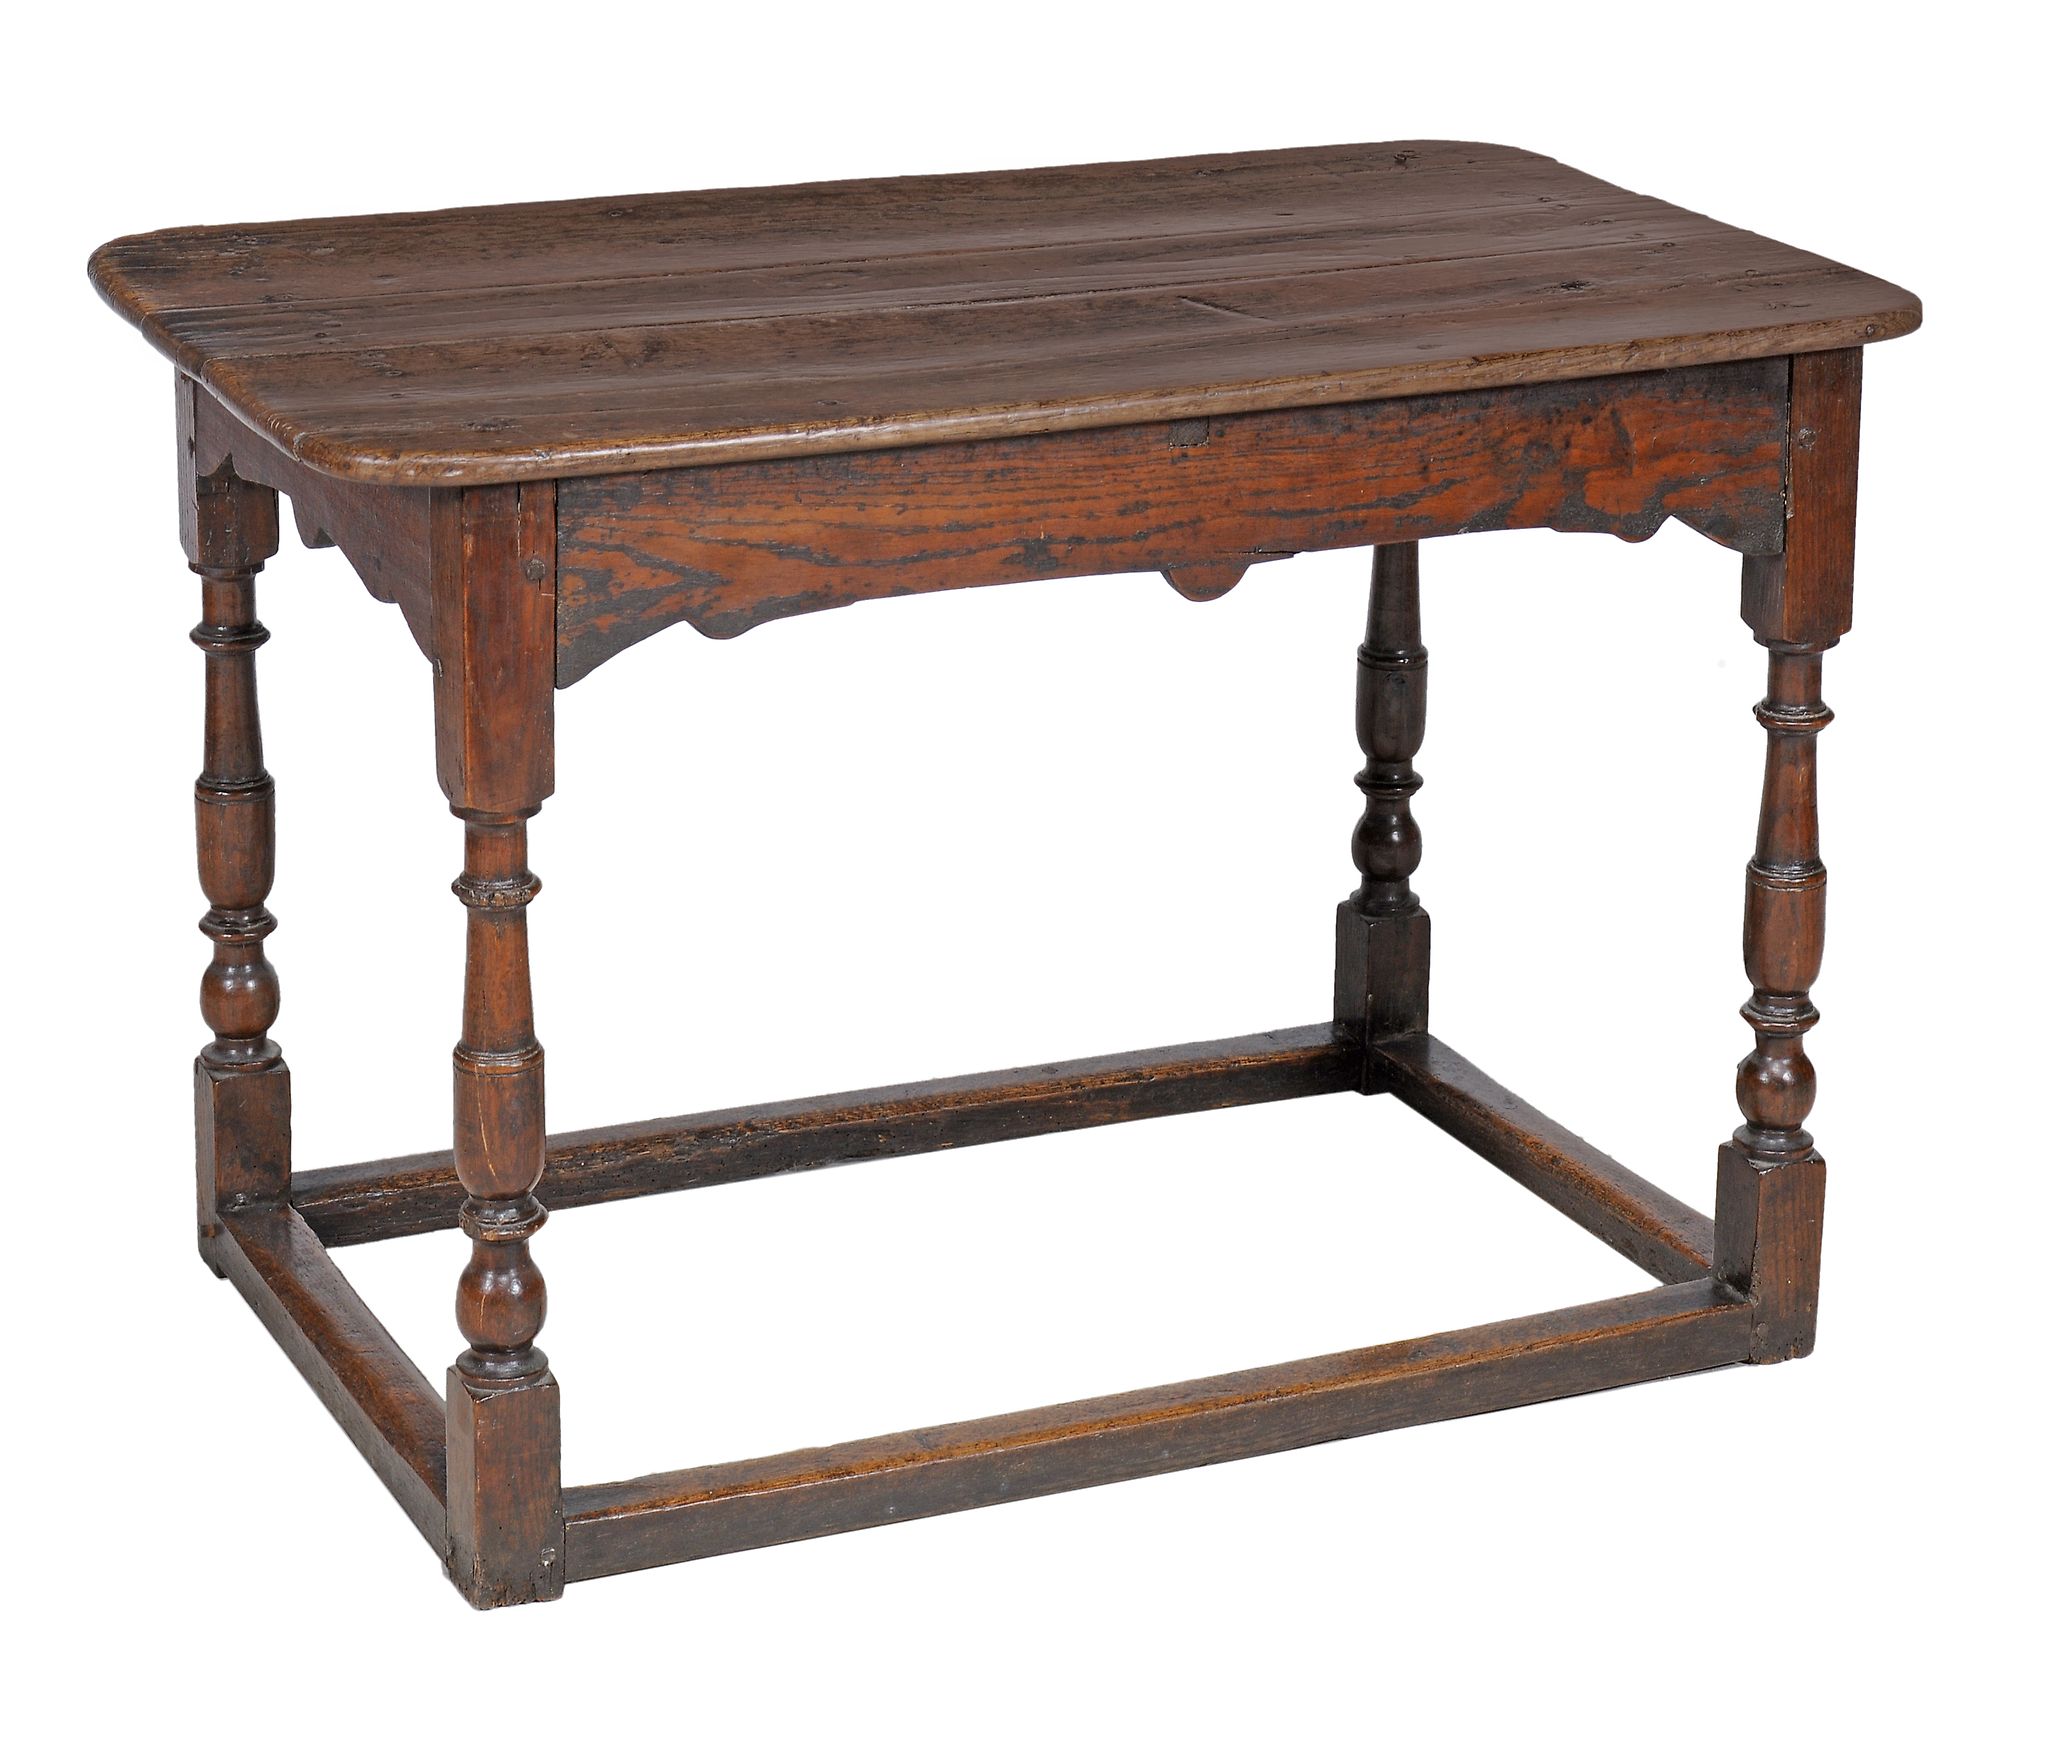 An oak centre table , late 17th century, the plank top with rounded corners...  An oak centre table